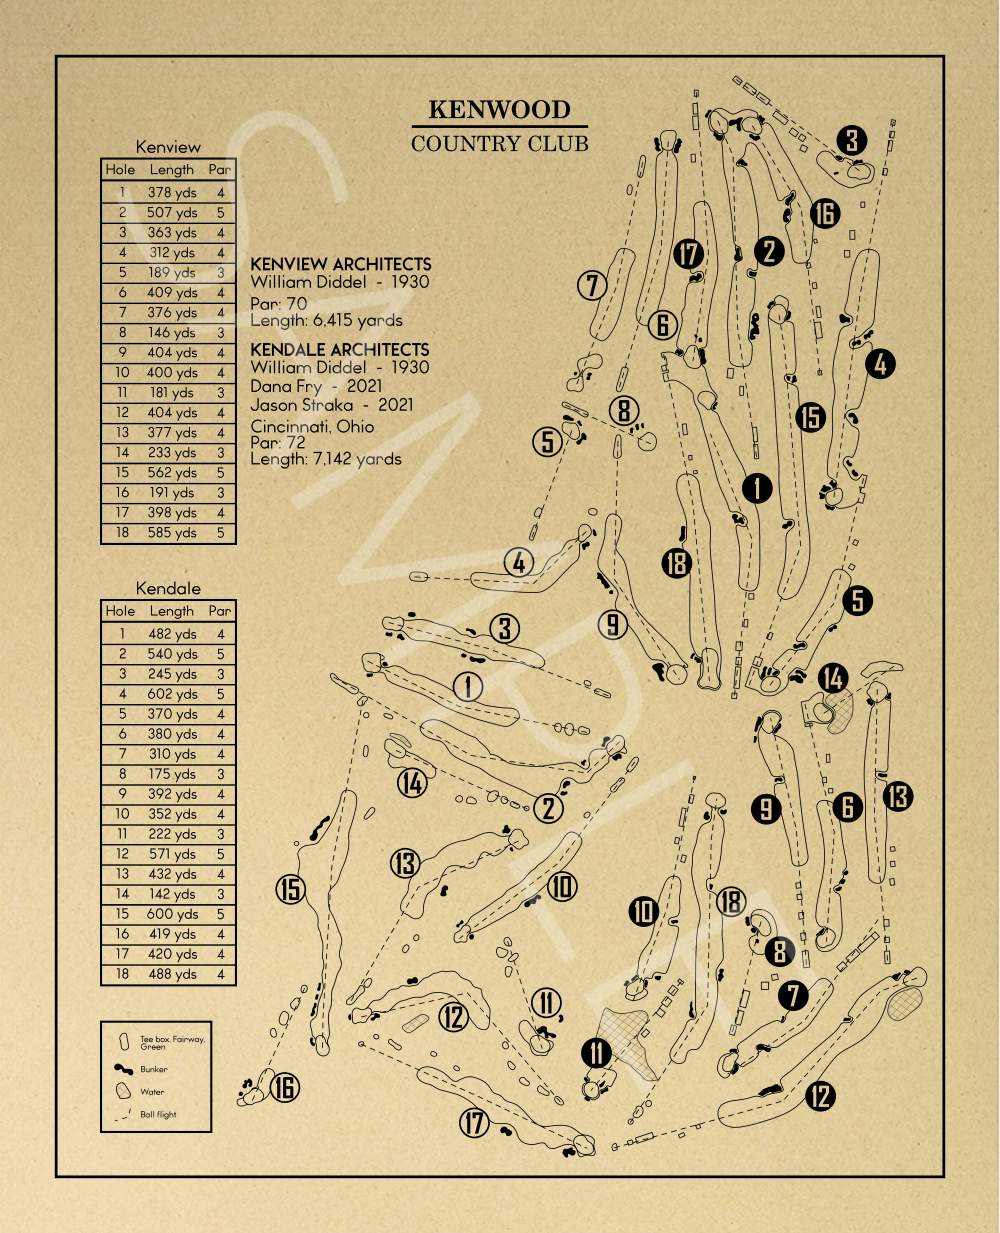 Kenwood Country Club Outline (Print)